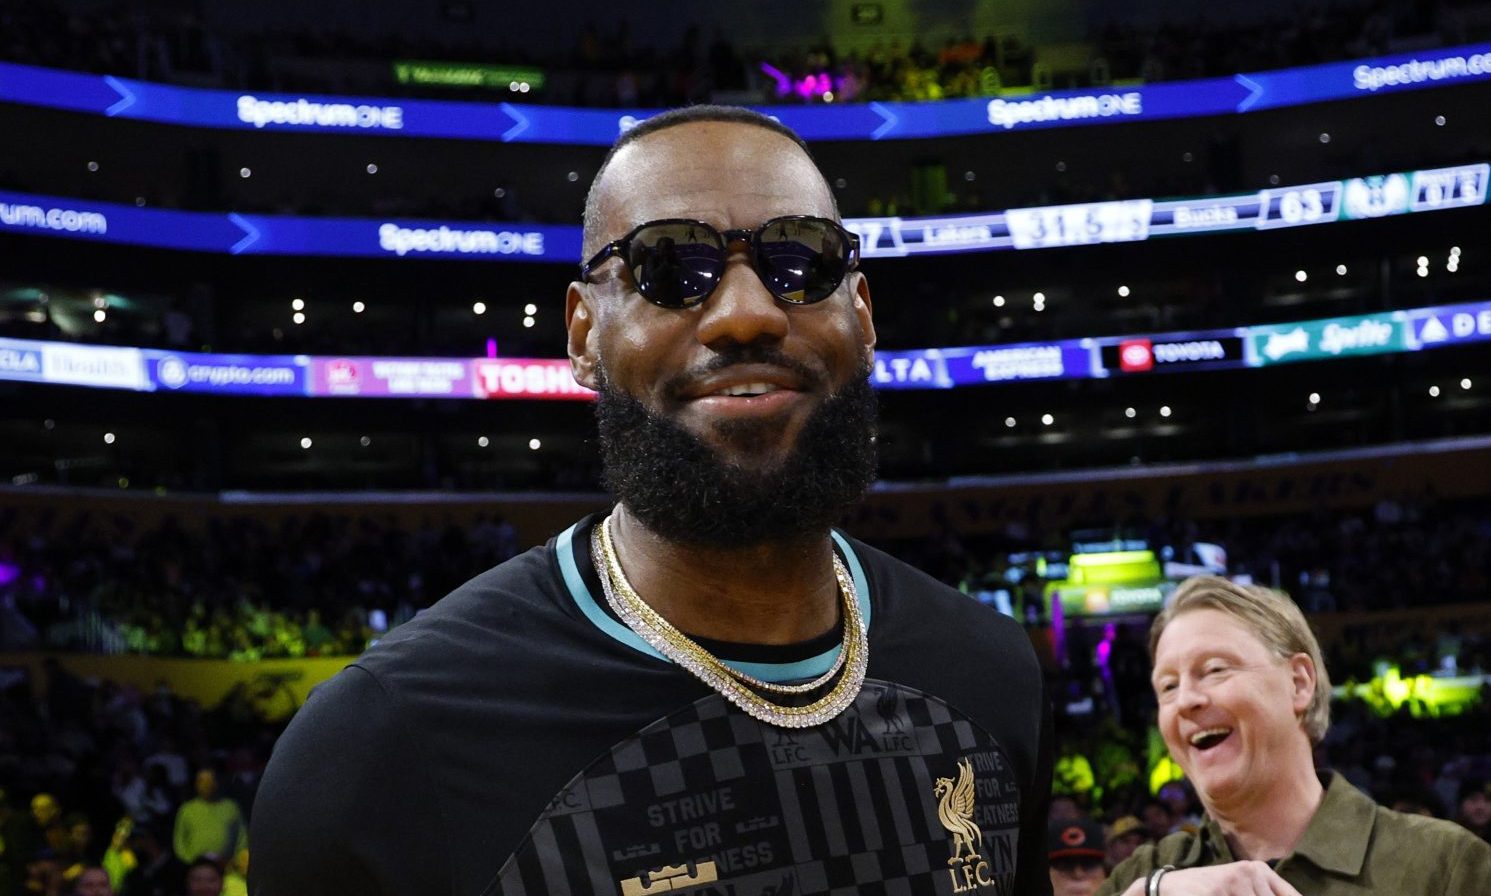 Wayment! Social Media Goes Nuts Over LeBron James’ Courtside Interaction With Lakers Proprietor Jeanie Buss